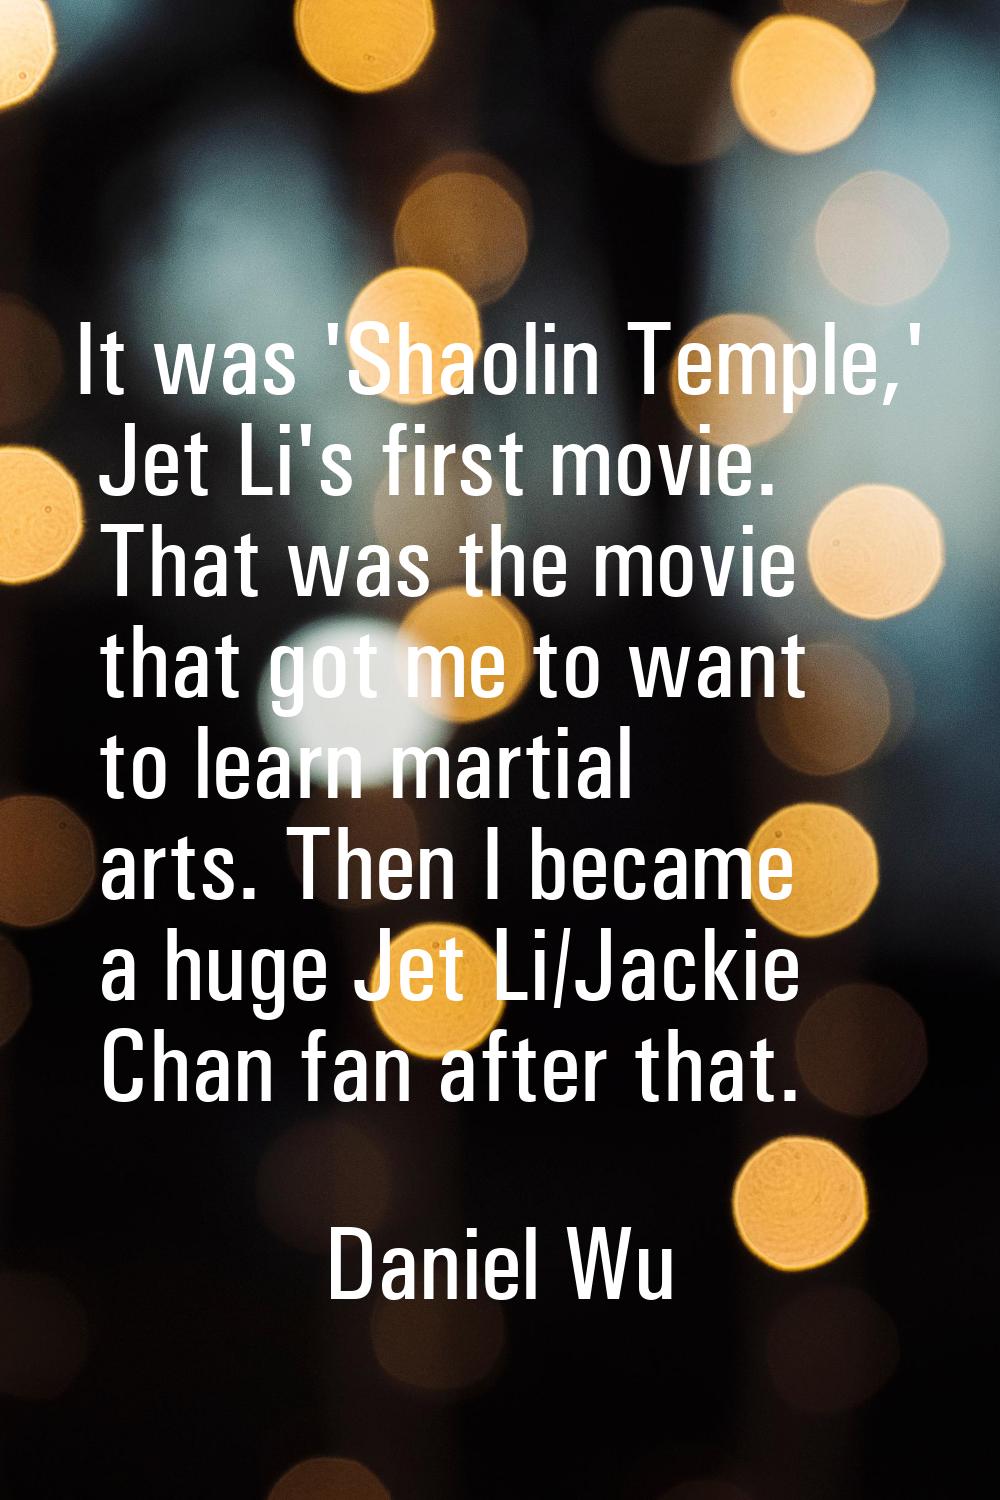 It was 'Shaolin Temple,' Jet Li's first movie. That was the movie that got me to want to learn mart